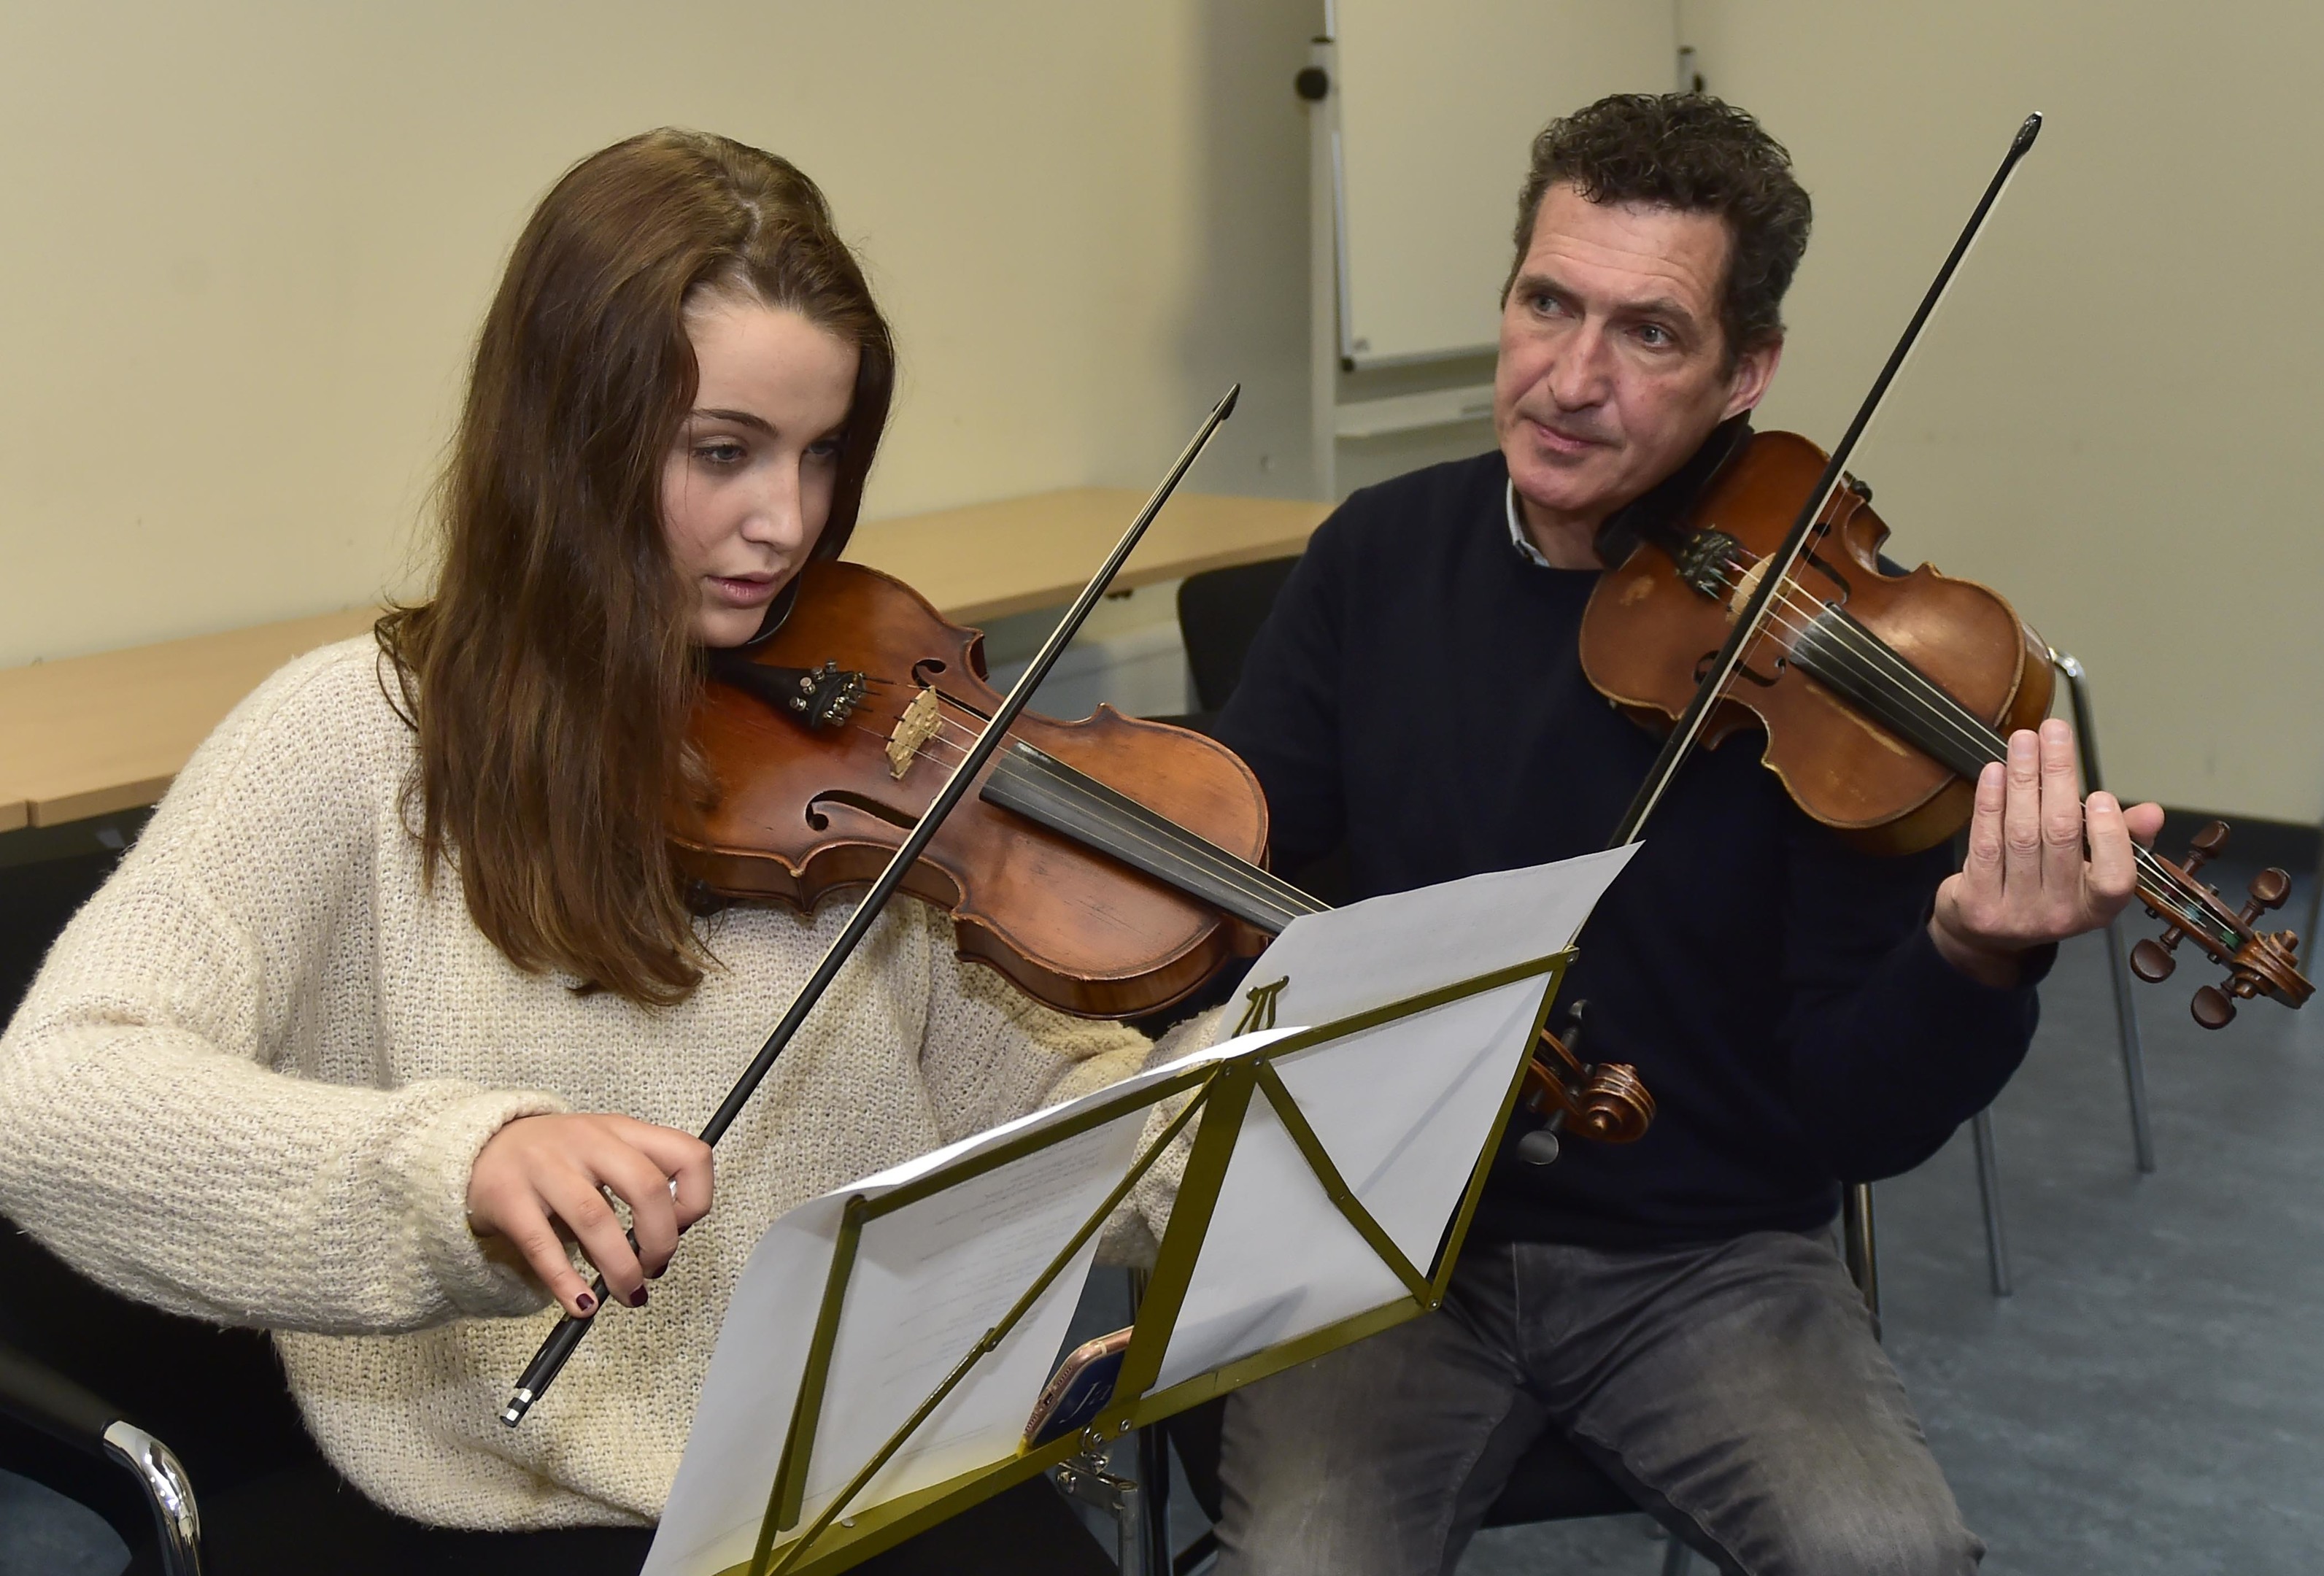 Ellie Wakerell receives instruction from guest tutor Charlie McKerron at the Fraserburgh event